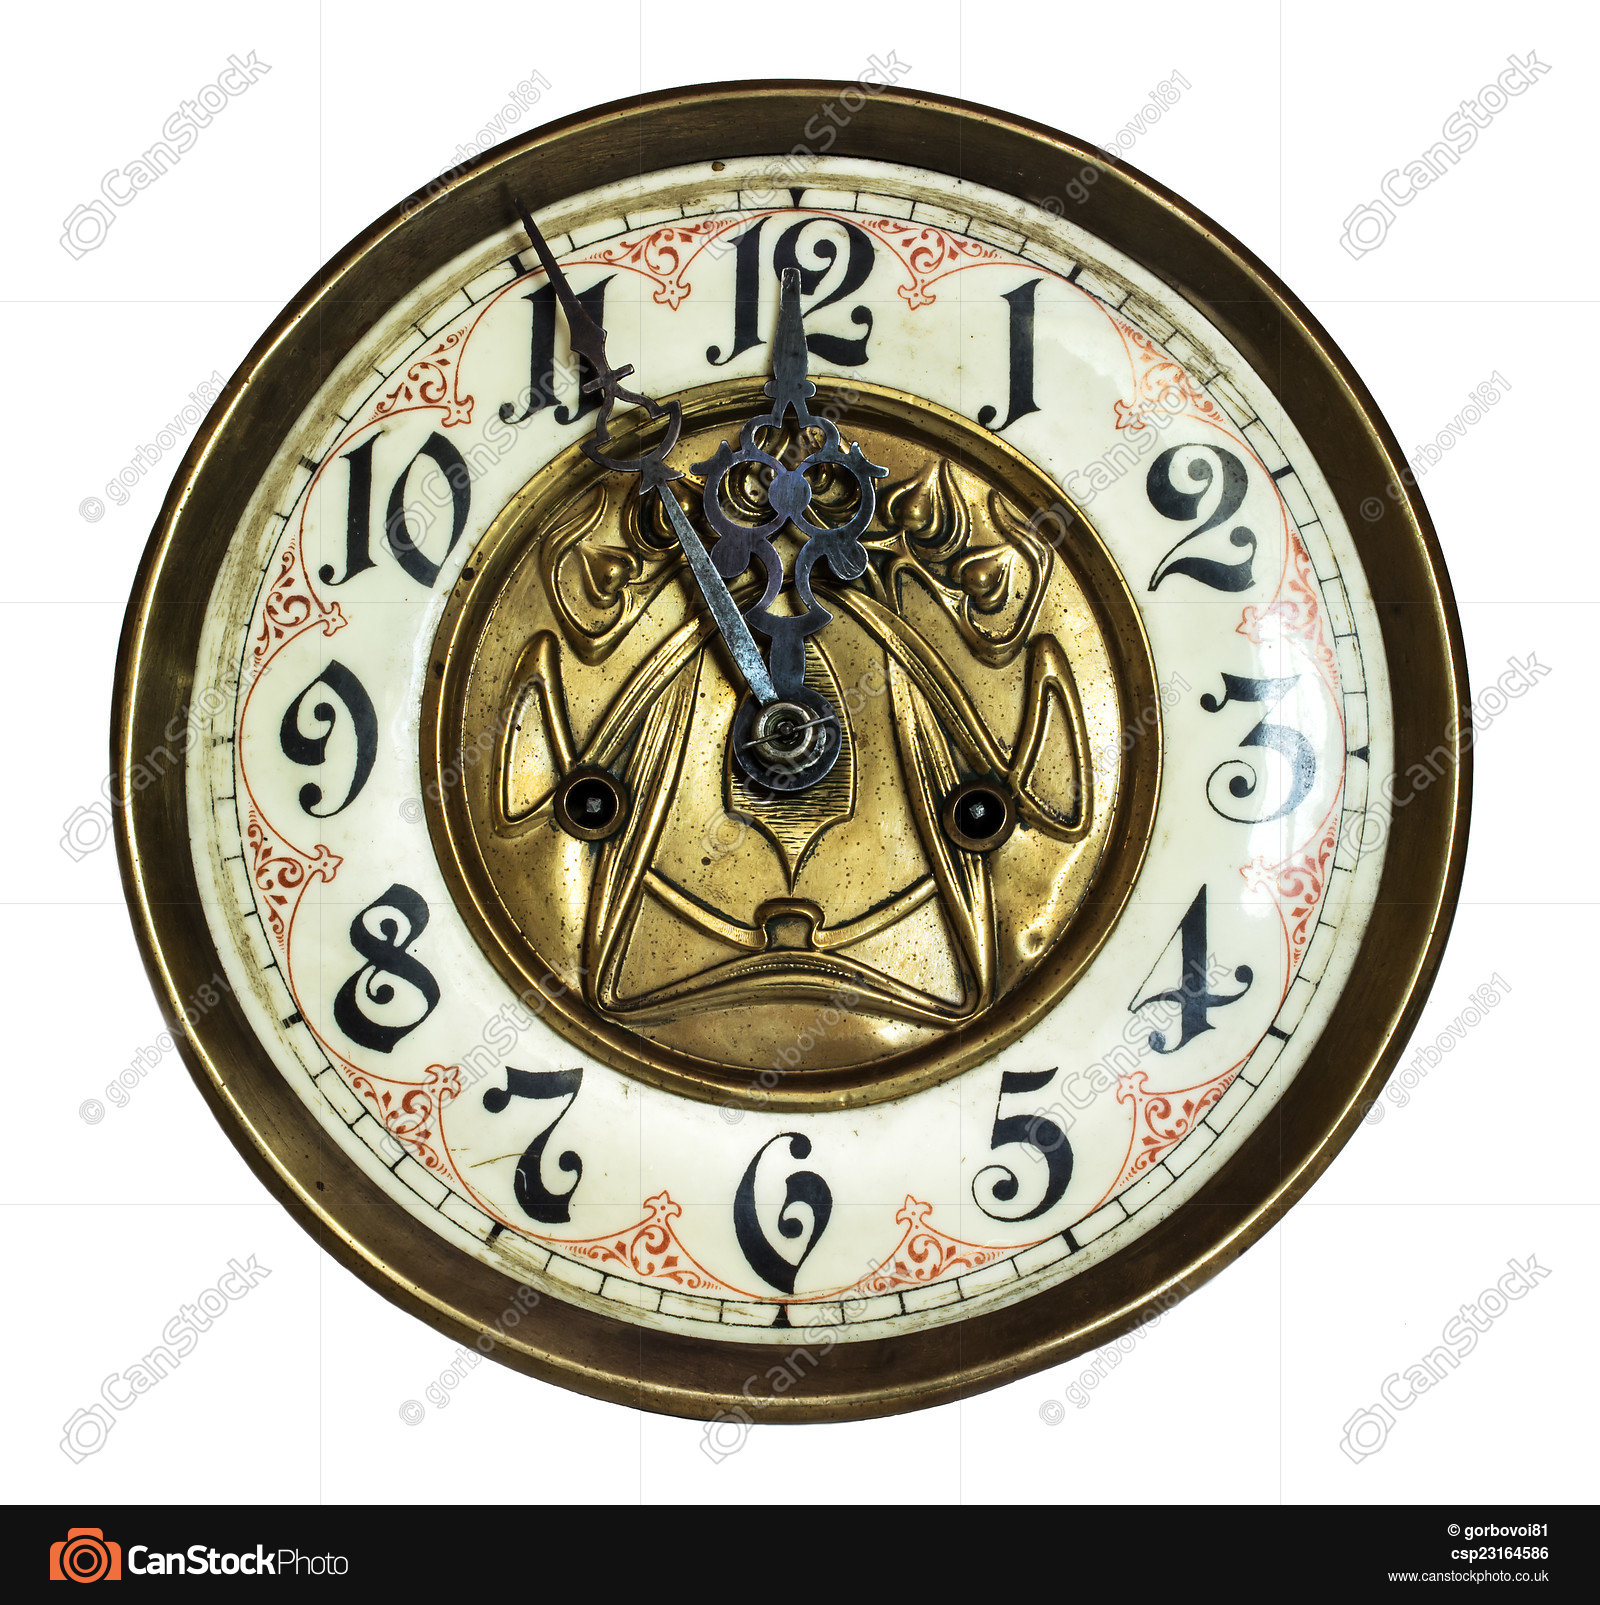 The old clock isolated on white background pictures - Search ...